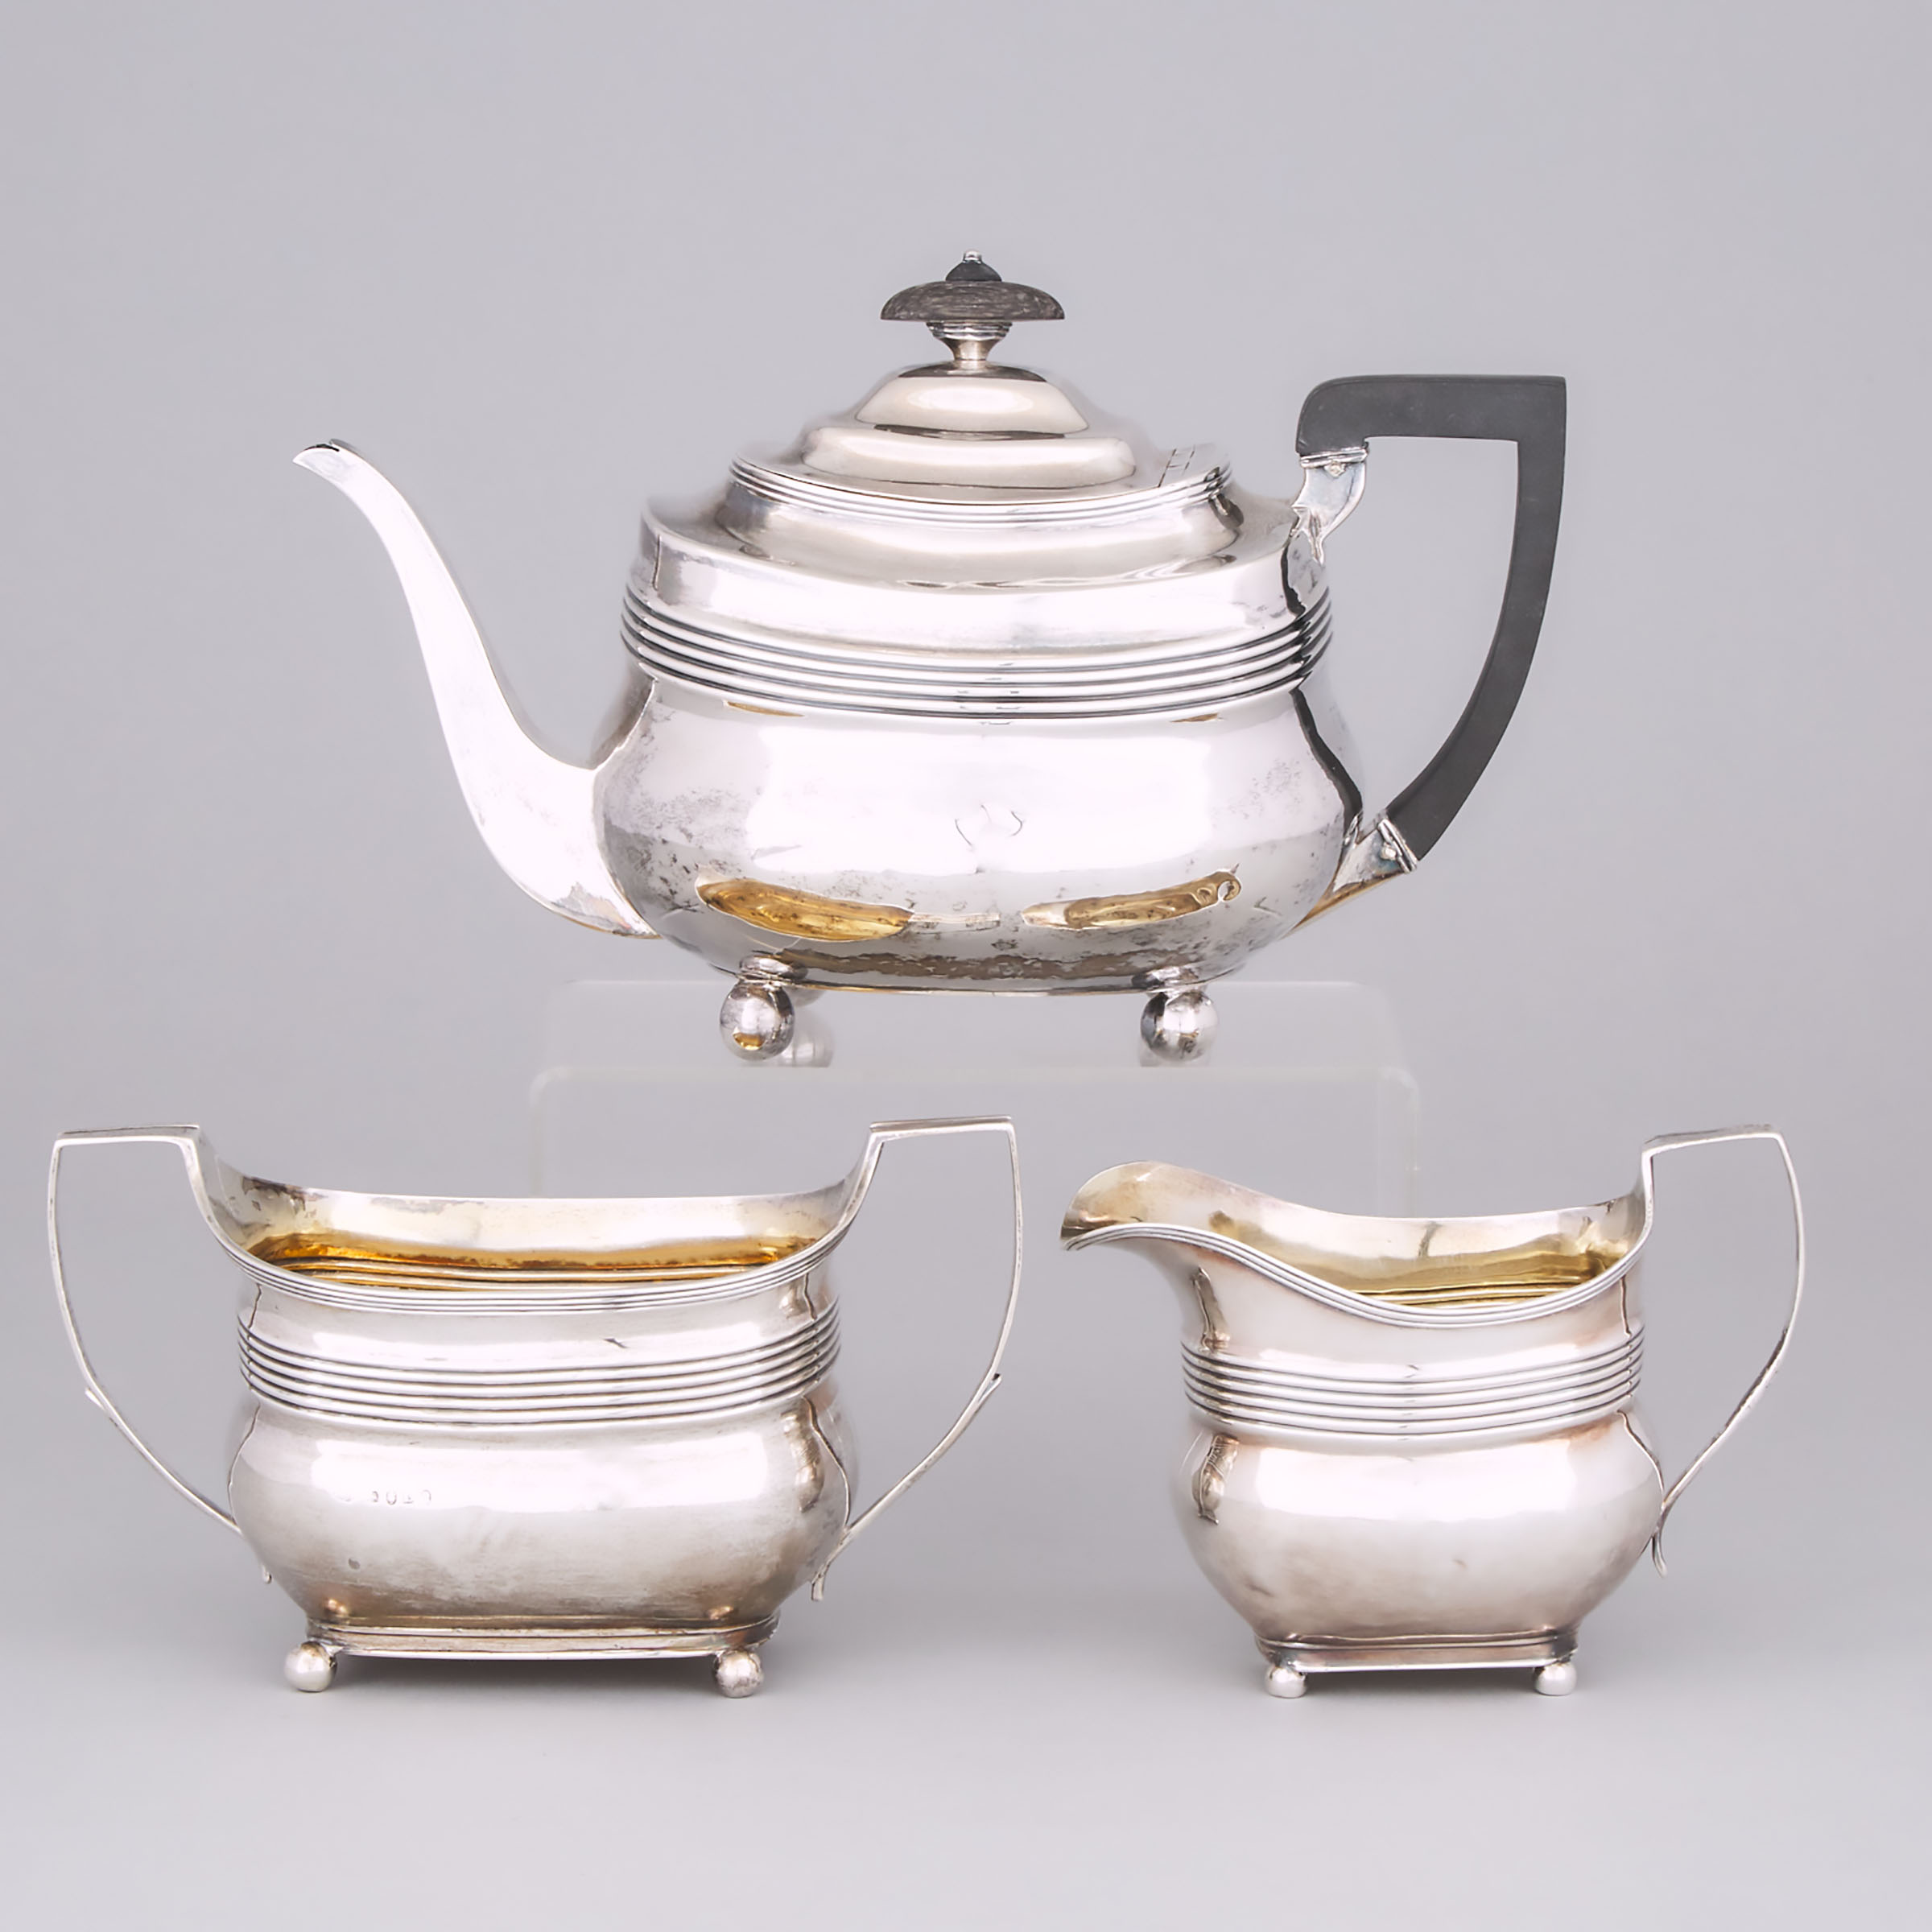 George III Silver Assembled Tea Service, Alice & George Burrows and Thomas Robins, London, 1806